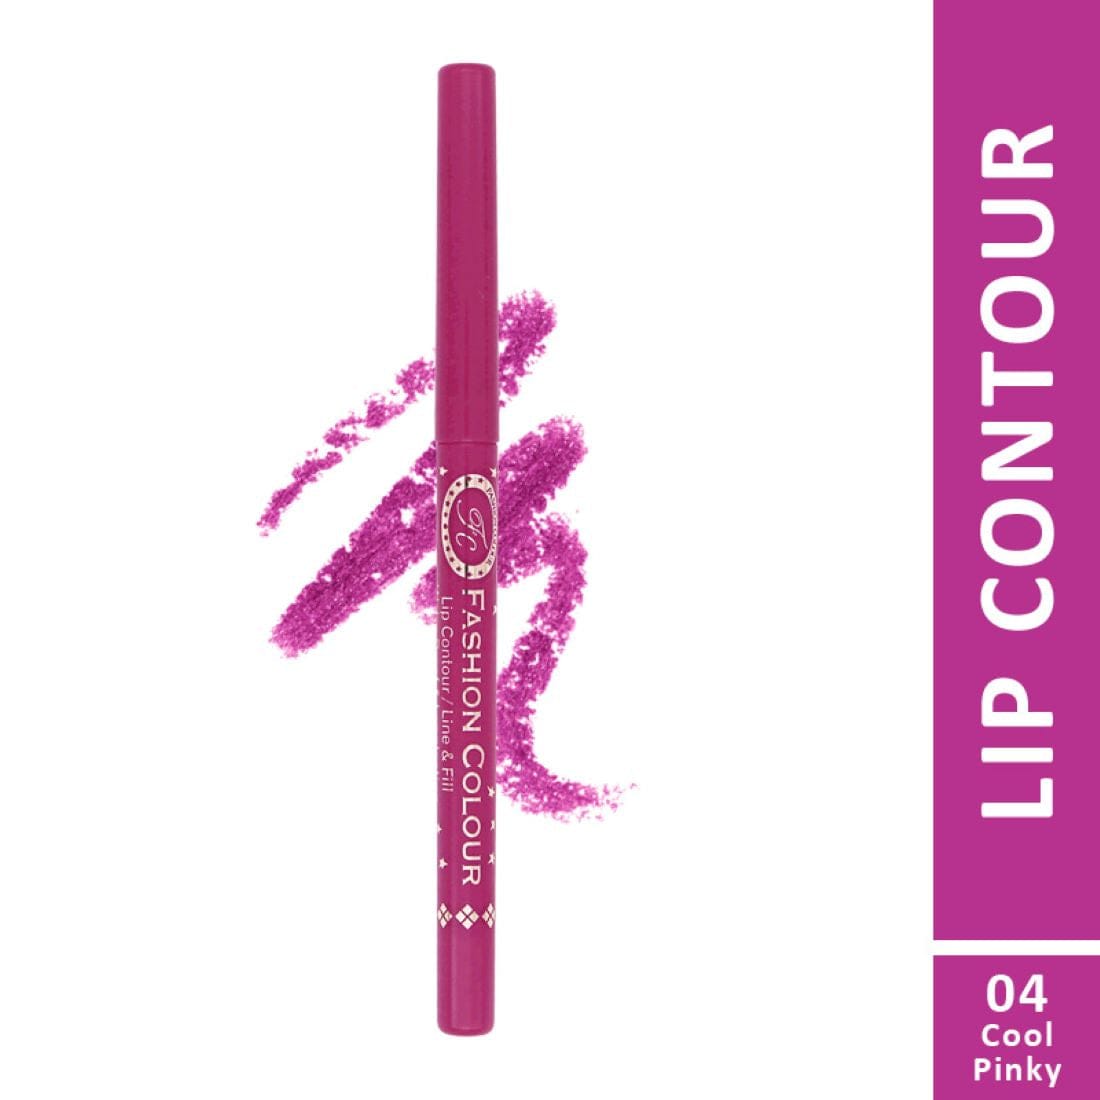 lipstick > lip liner > Color lipstick > Lipstick colors > shades > lip contour > Lipstick shades Balance and beautify your lips with the matte color pencil to deal with flat lips, thin lips, wide or narrow mouth, or uneven shape. Worn alone or with a Fashion Colour Lipstick The Gorgeous Fashion Colour Lip Contour Pencil glides on and the lip contour a plumped appearance while enhancing the color of a perfected long lasting finish Waterproof, Long Lasting Lip Contour